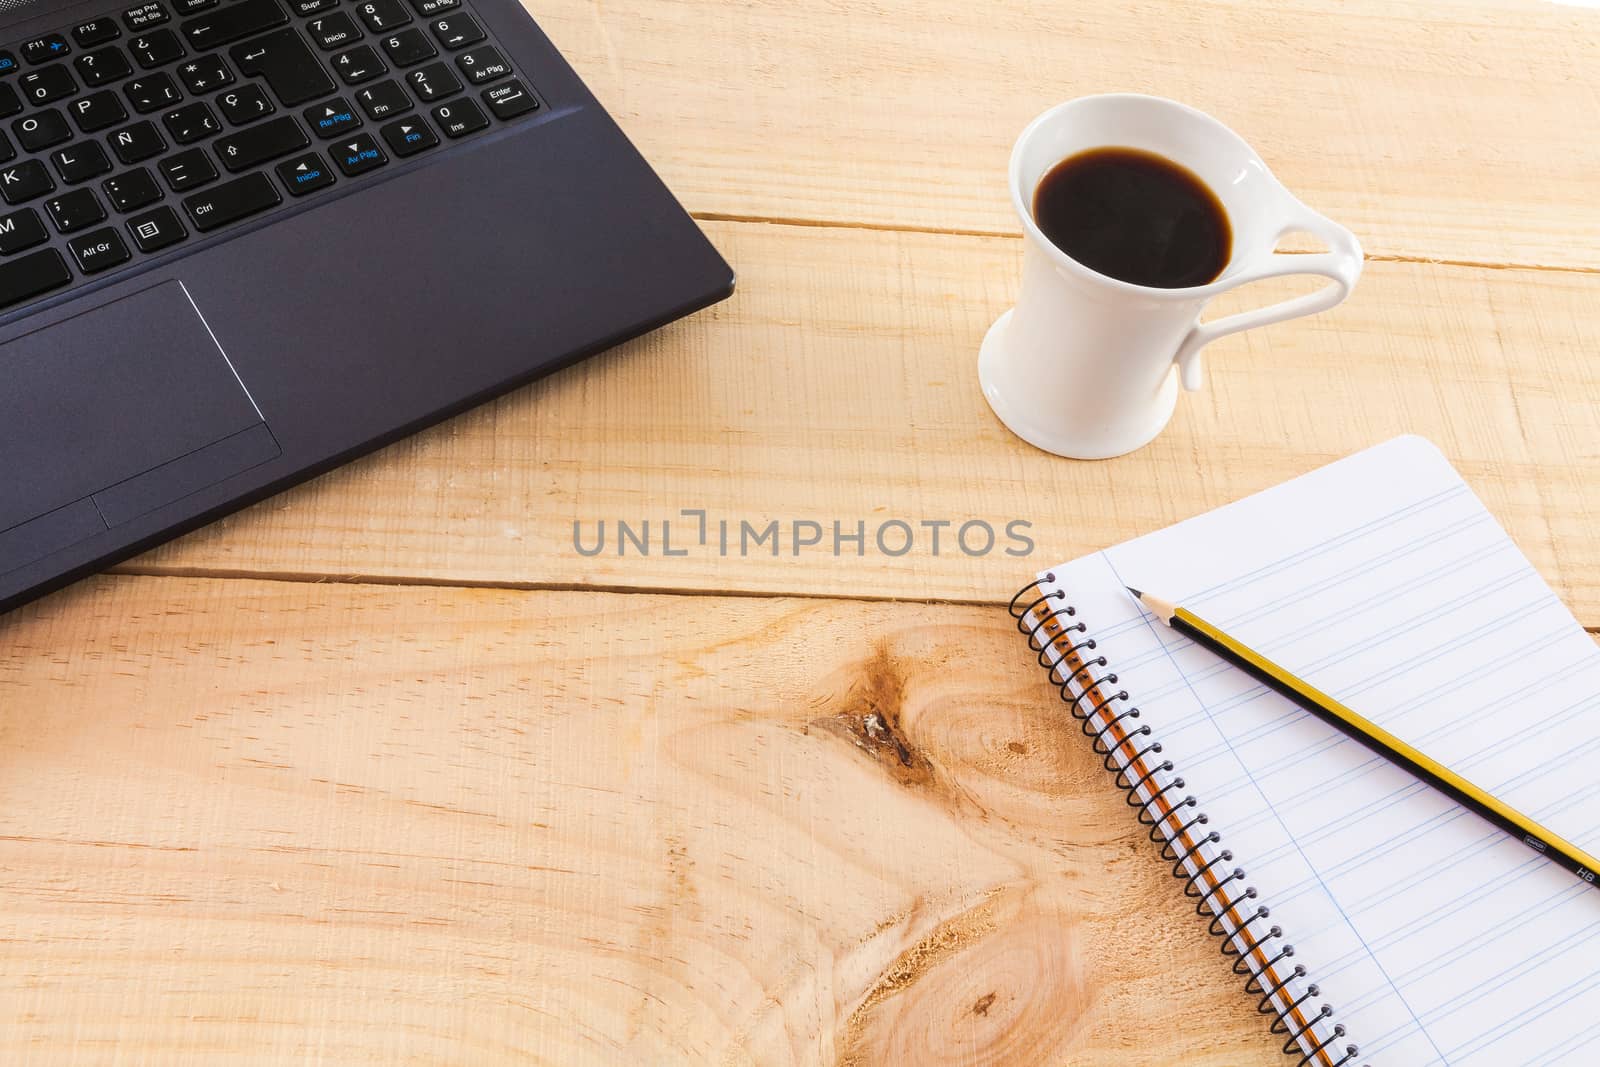 Collection of objects of an freelance worker or someone who works at home, on wooden background illuminated with natural light and photographed from above